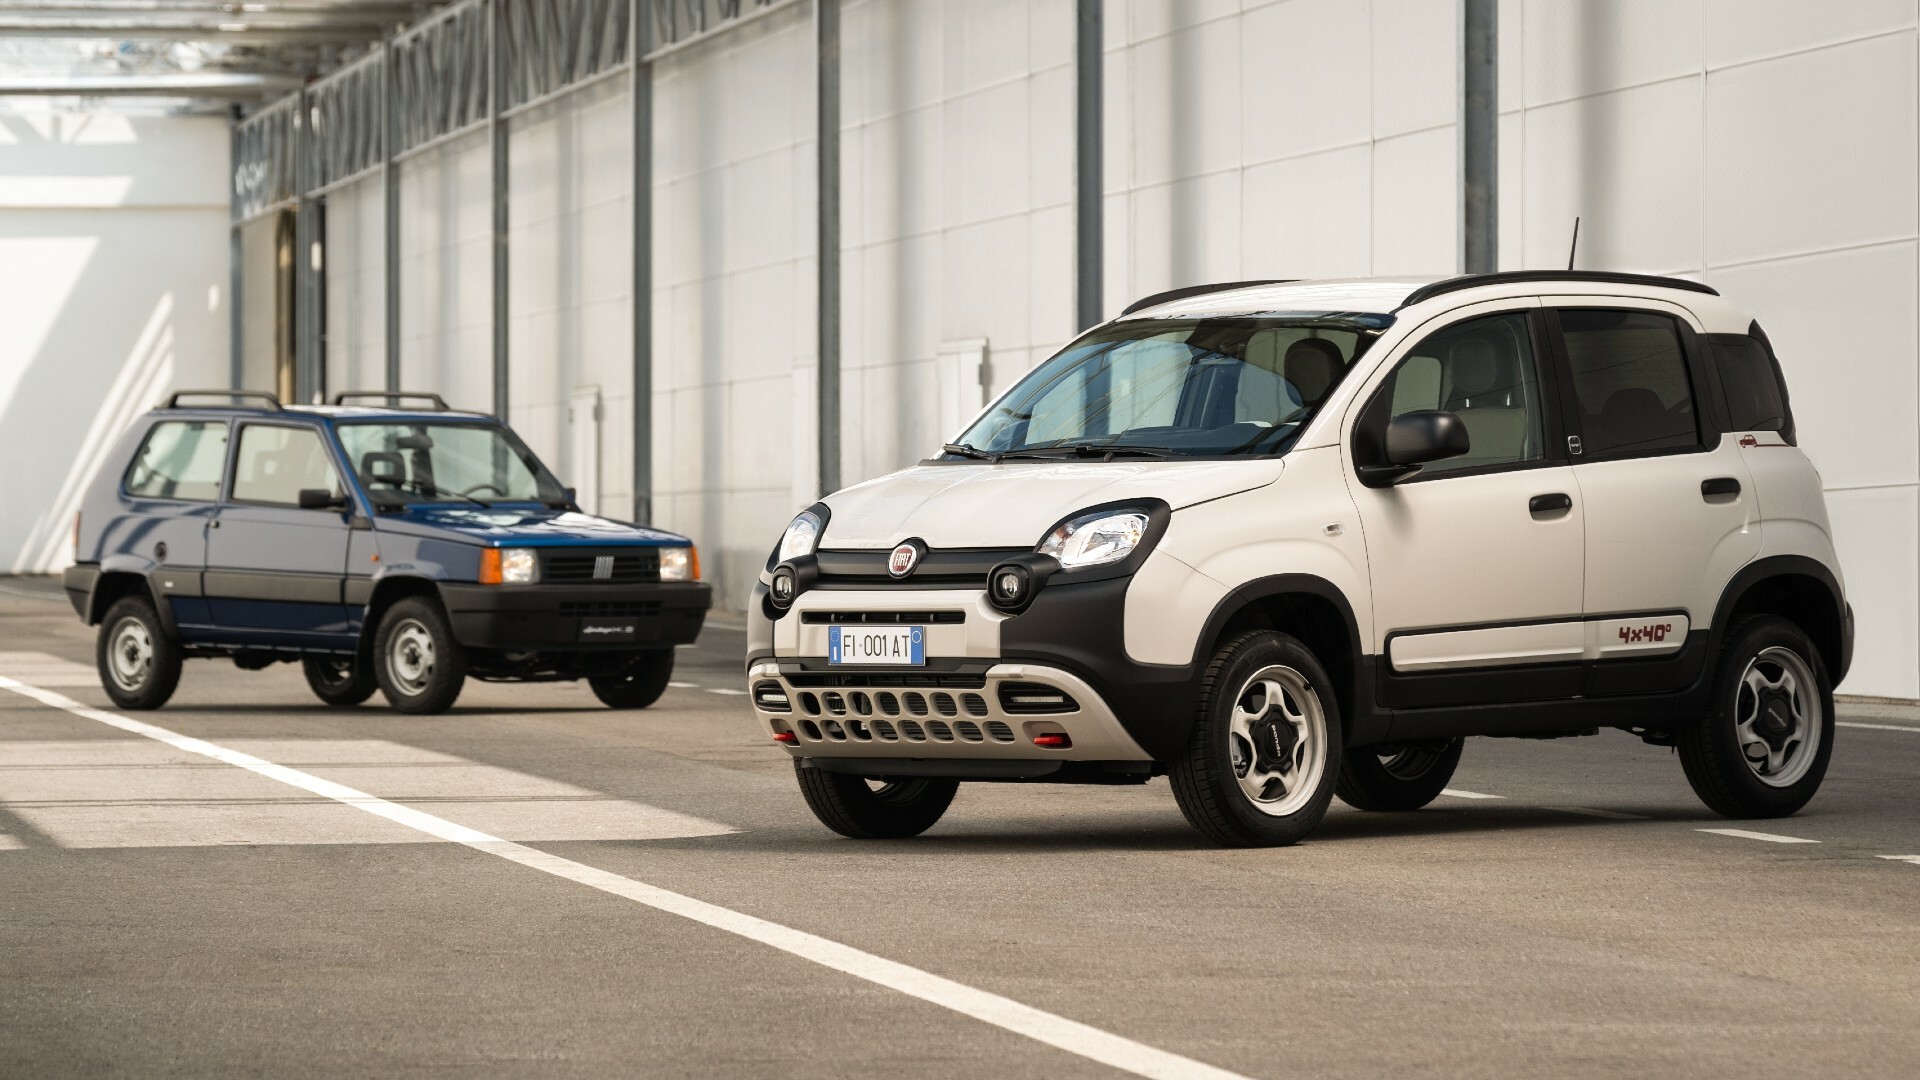 Is this new all-electric Eighties Fiat Panda bonkers or brilliant?